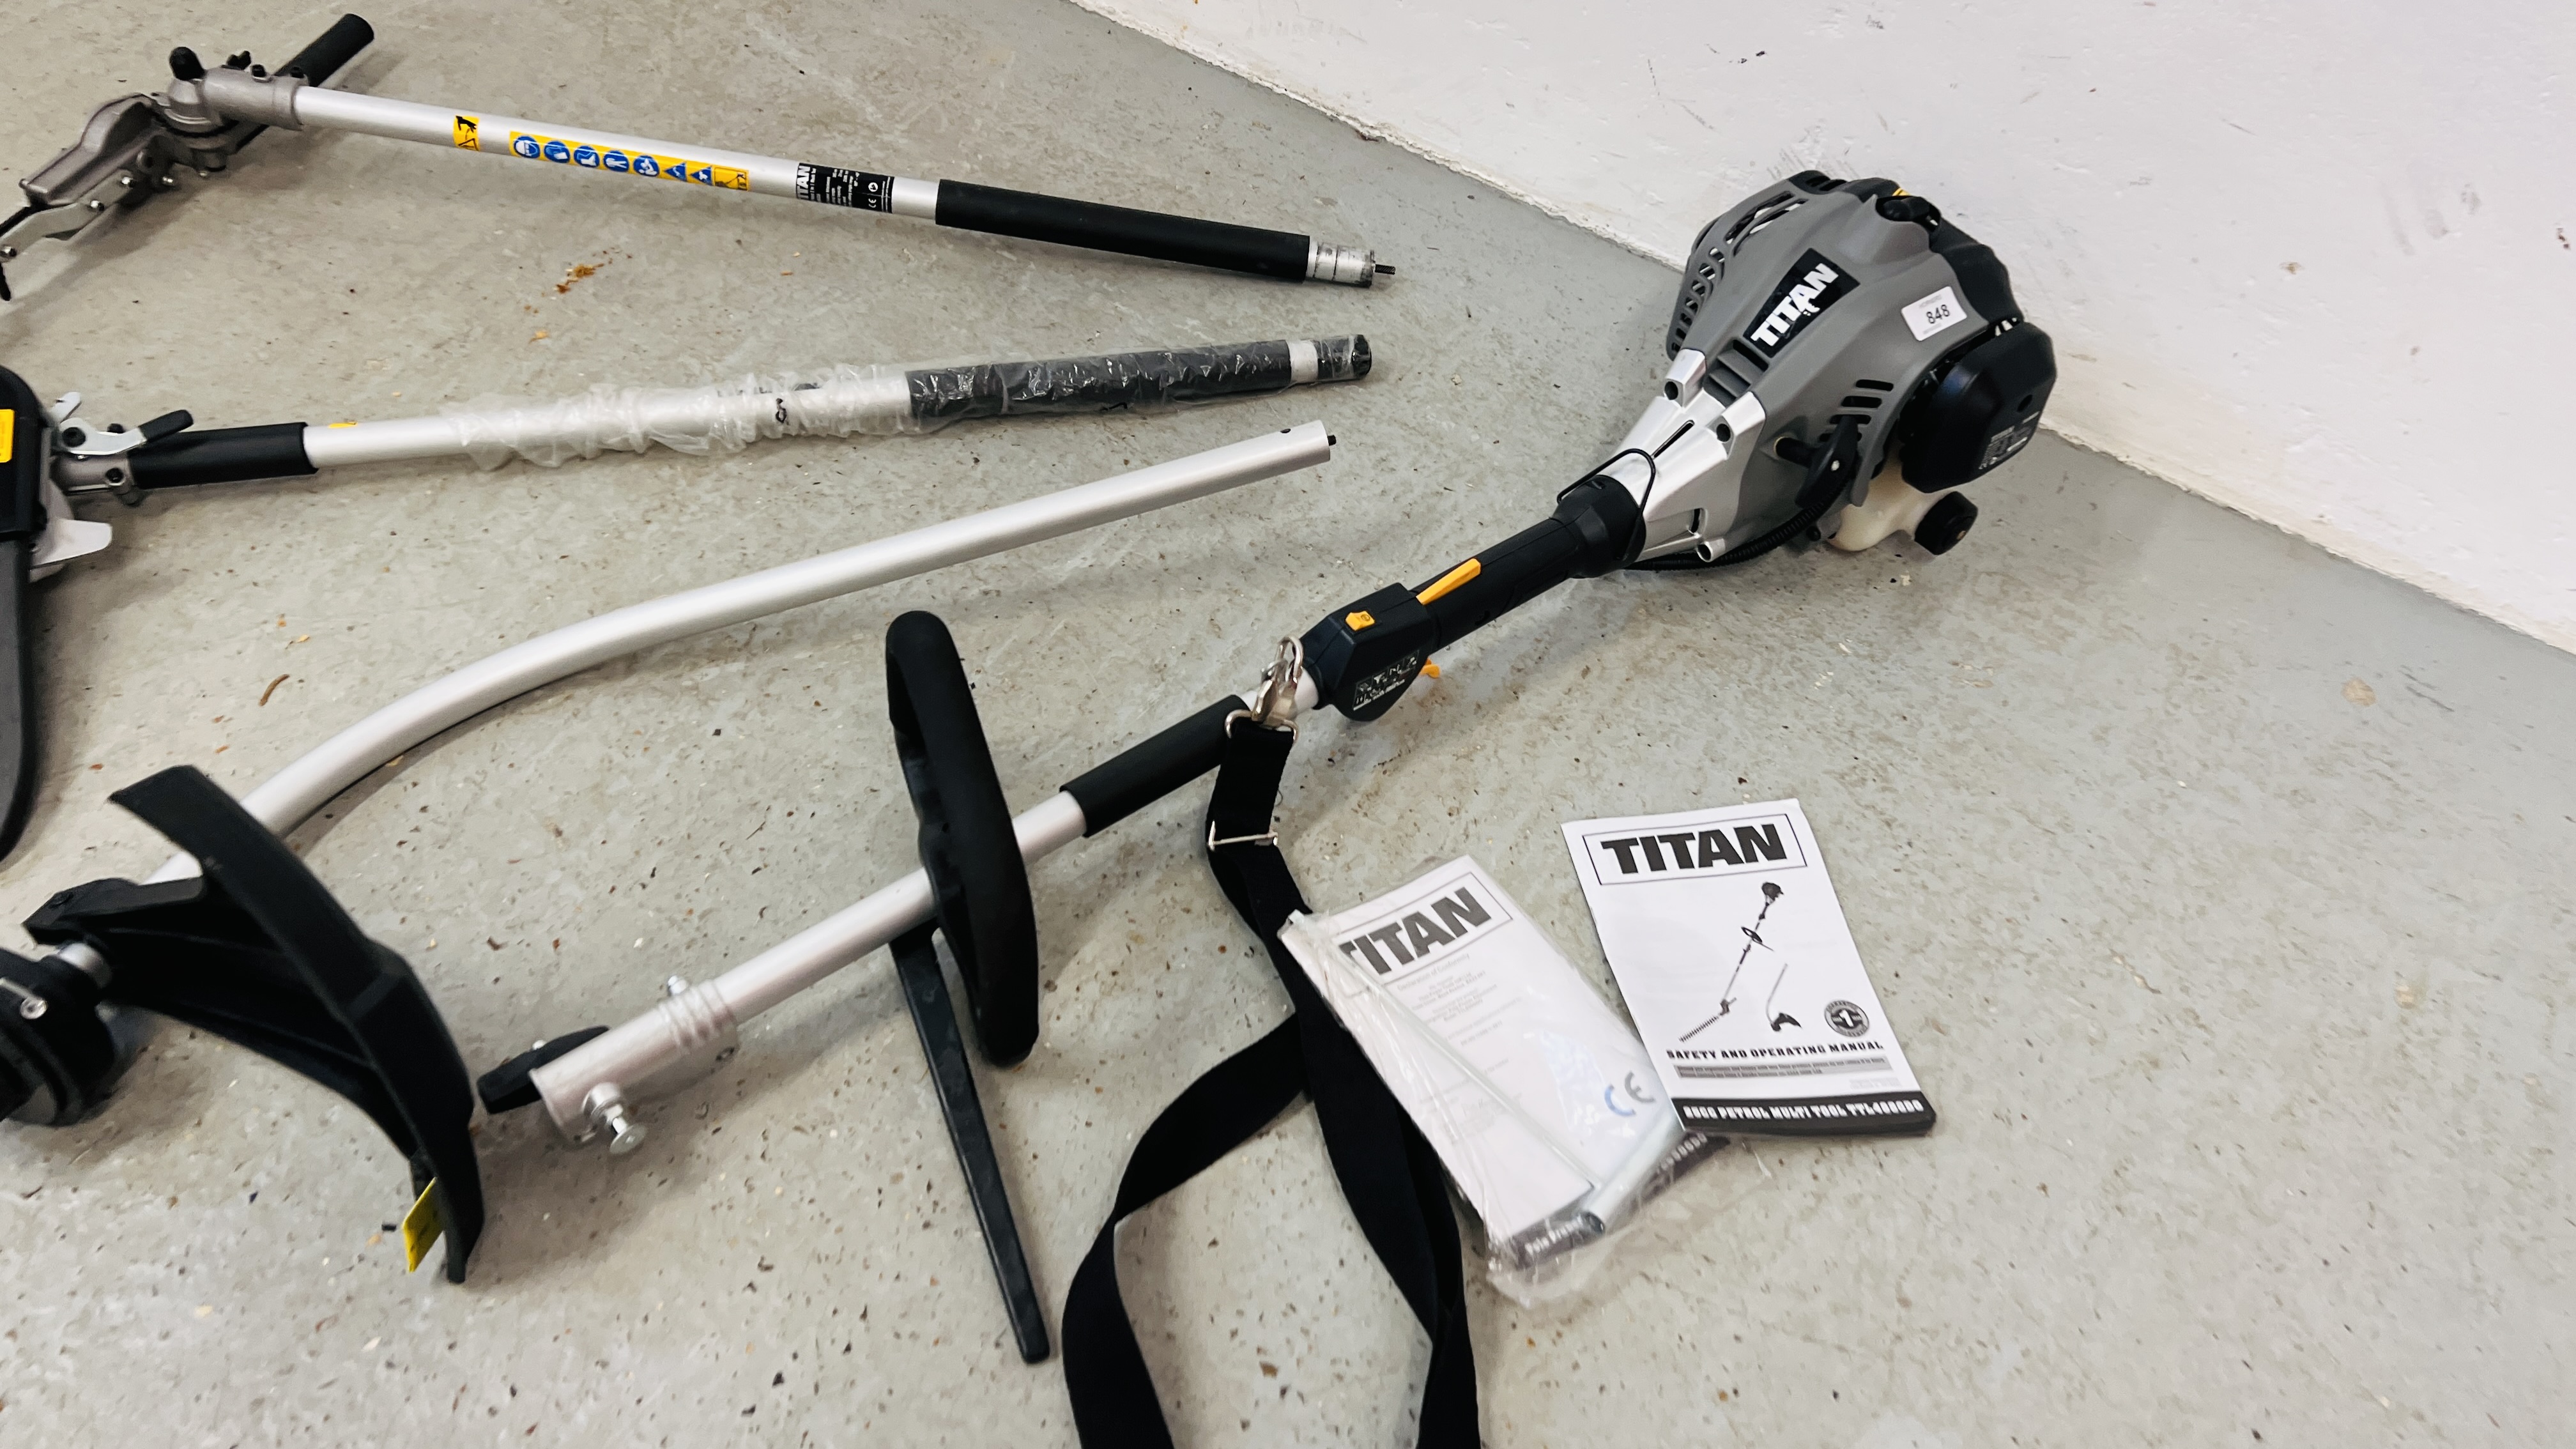 TITAN TTL488GDO 25CC PETROL 3 IN 1 MULTI TOOL, AS NEW WITH INSTRUCTIONS. - Image 2 of 7